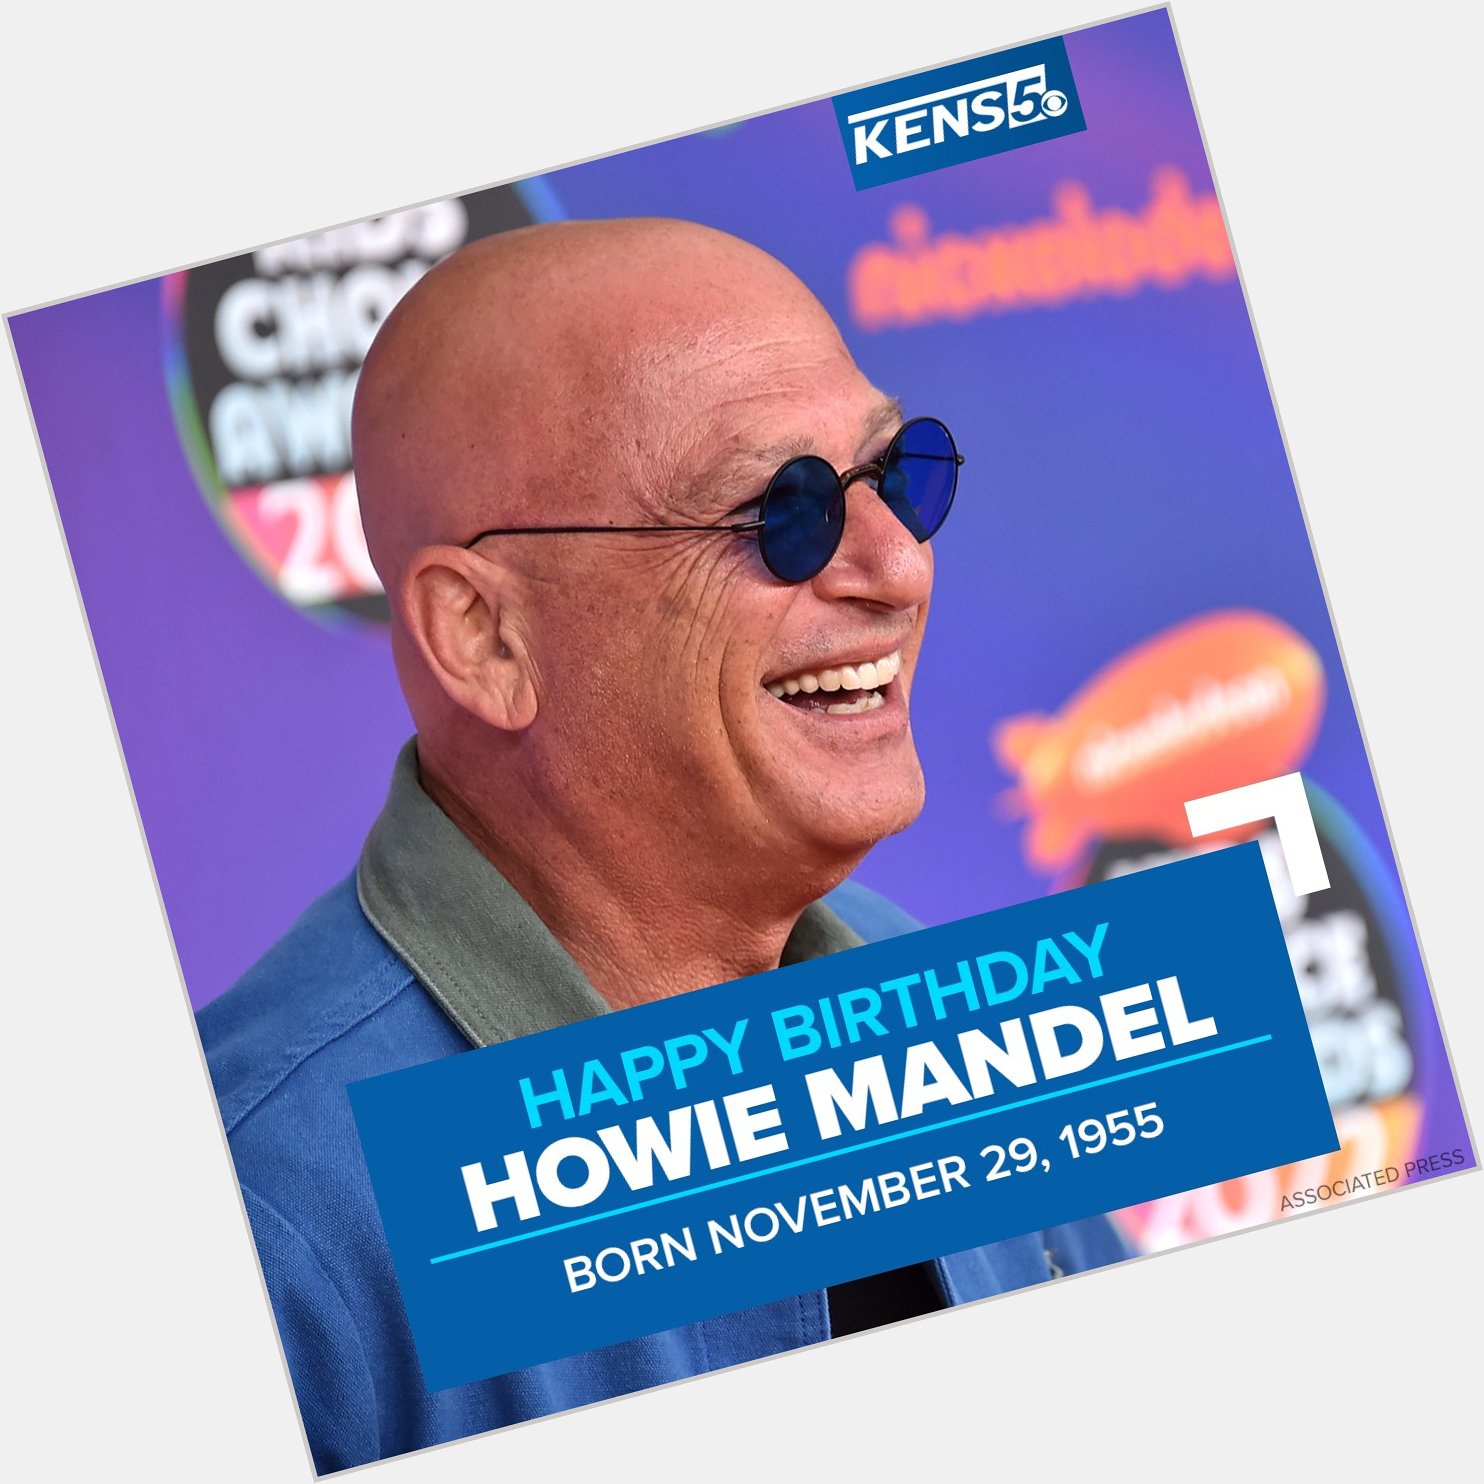 Join us in wishing Howie Mandel a very HAPPY BIRTHDAY! He is 67 years old today.  